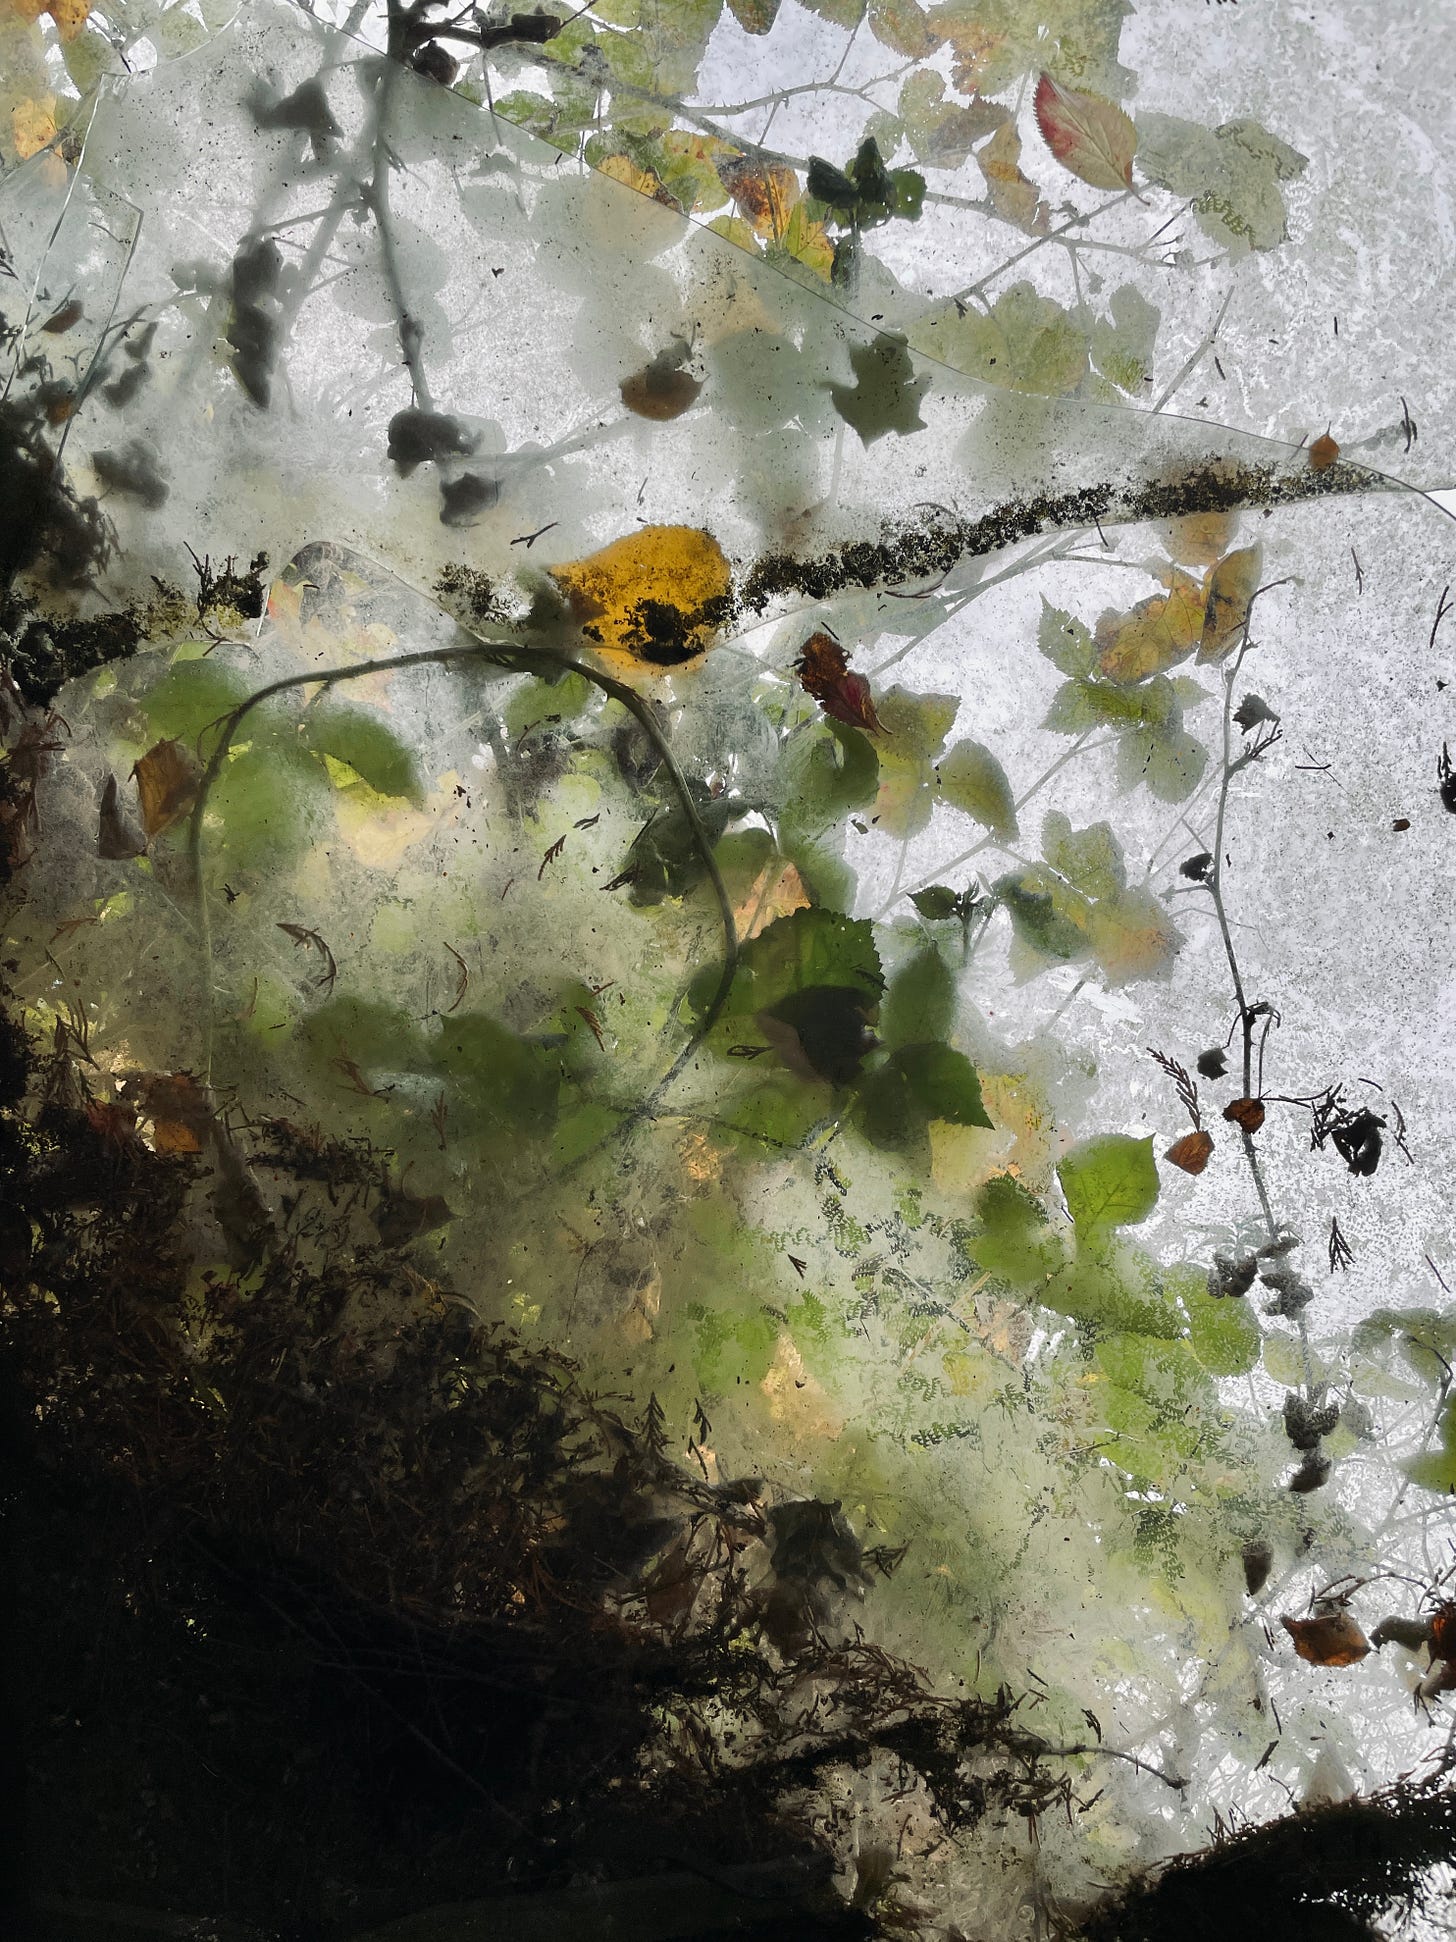 A texture of leaves on dirty glass.